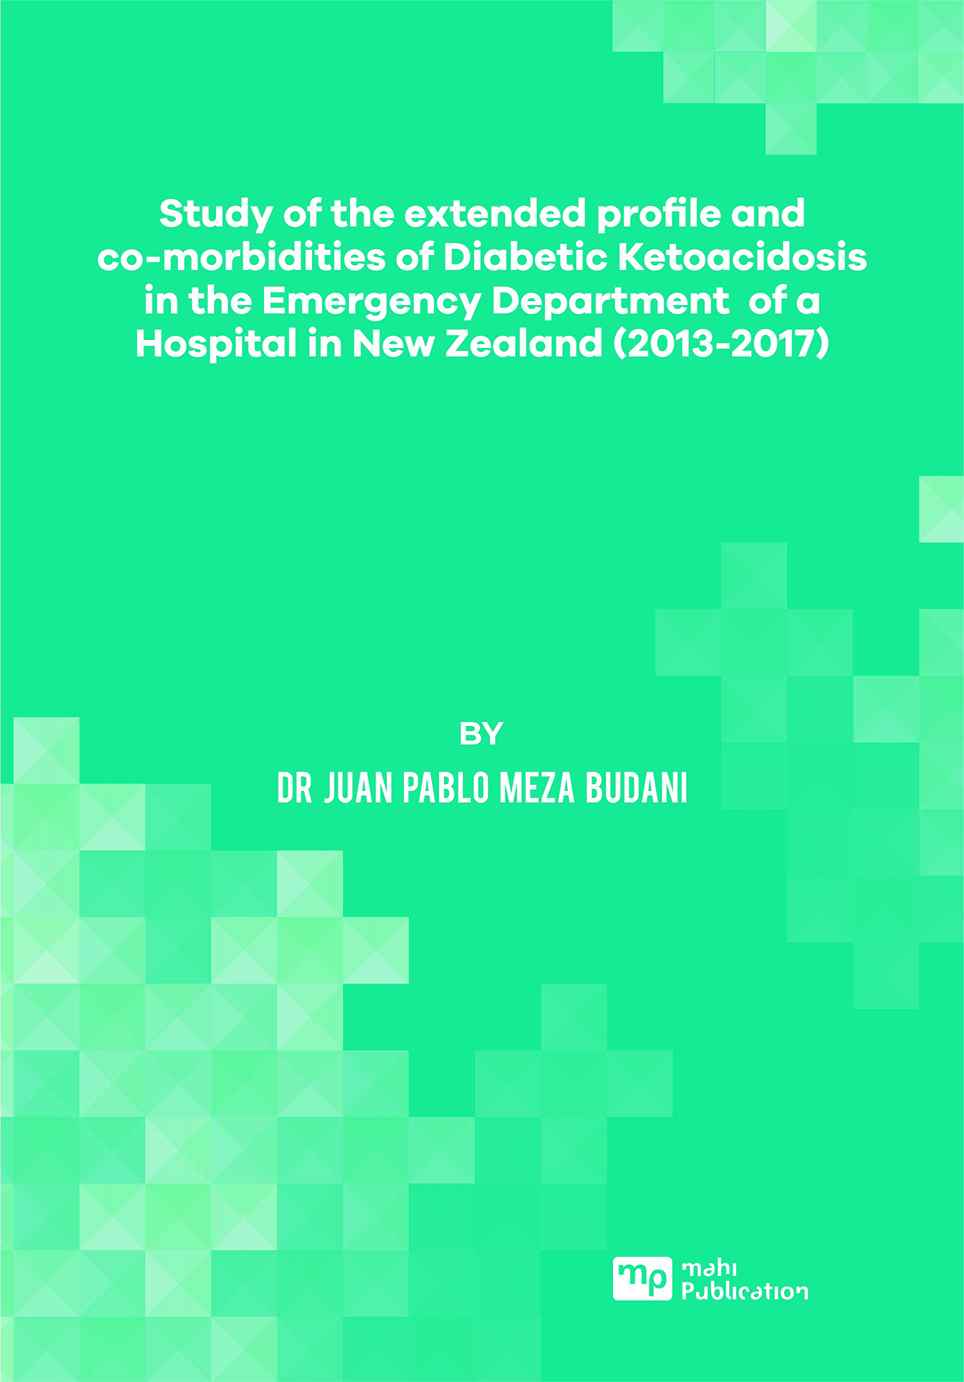 Study Of The Extended Profile And Co-Morbidities Of Diabetic Ketoacidosis In The Emergency Department Of A Hospital In New Zealand (2013-2017)